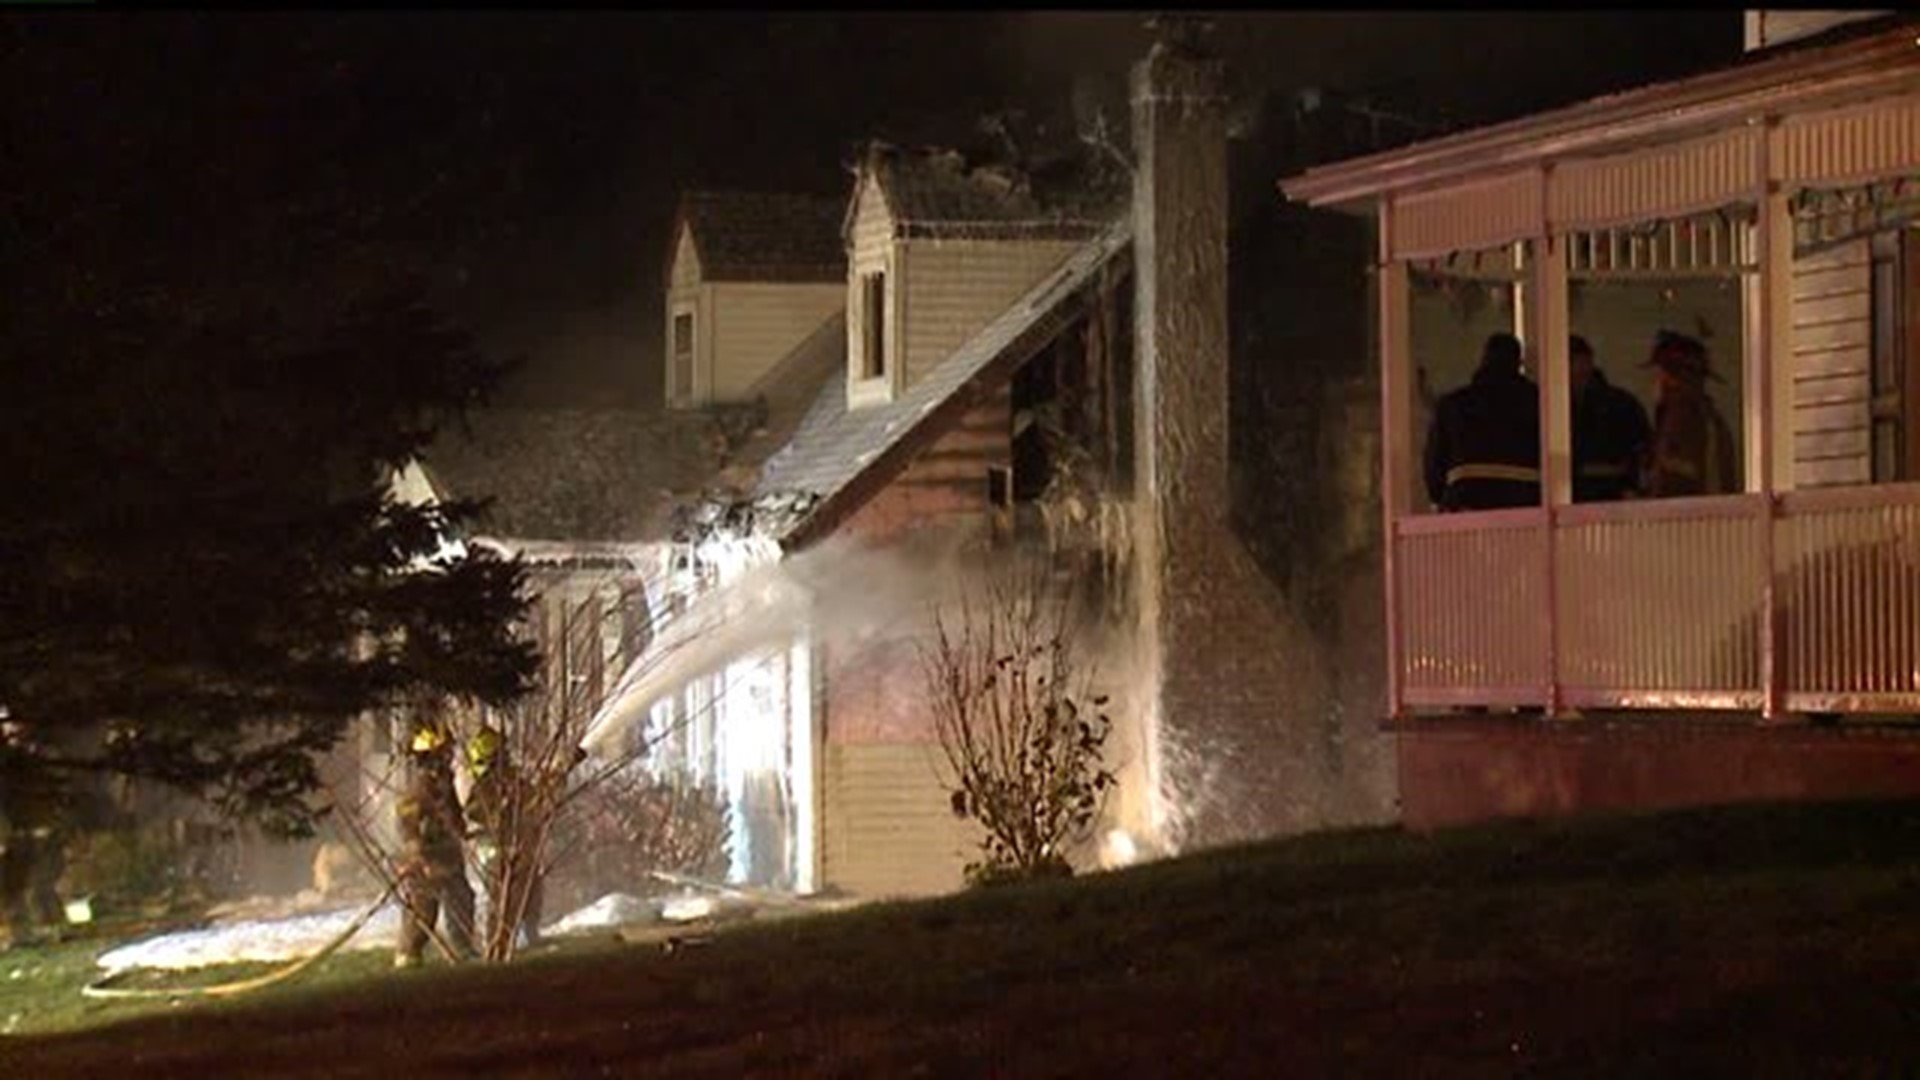 Overnight house fire breaks out in Monaghan Township